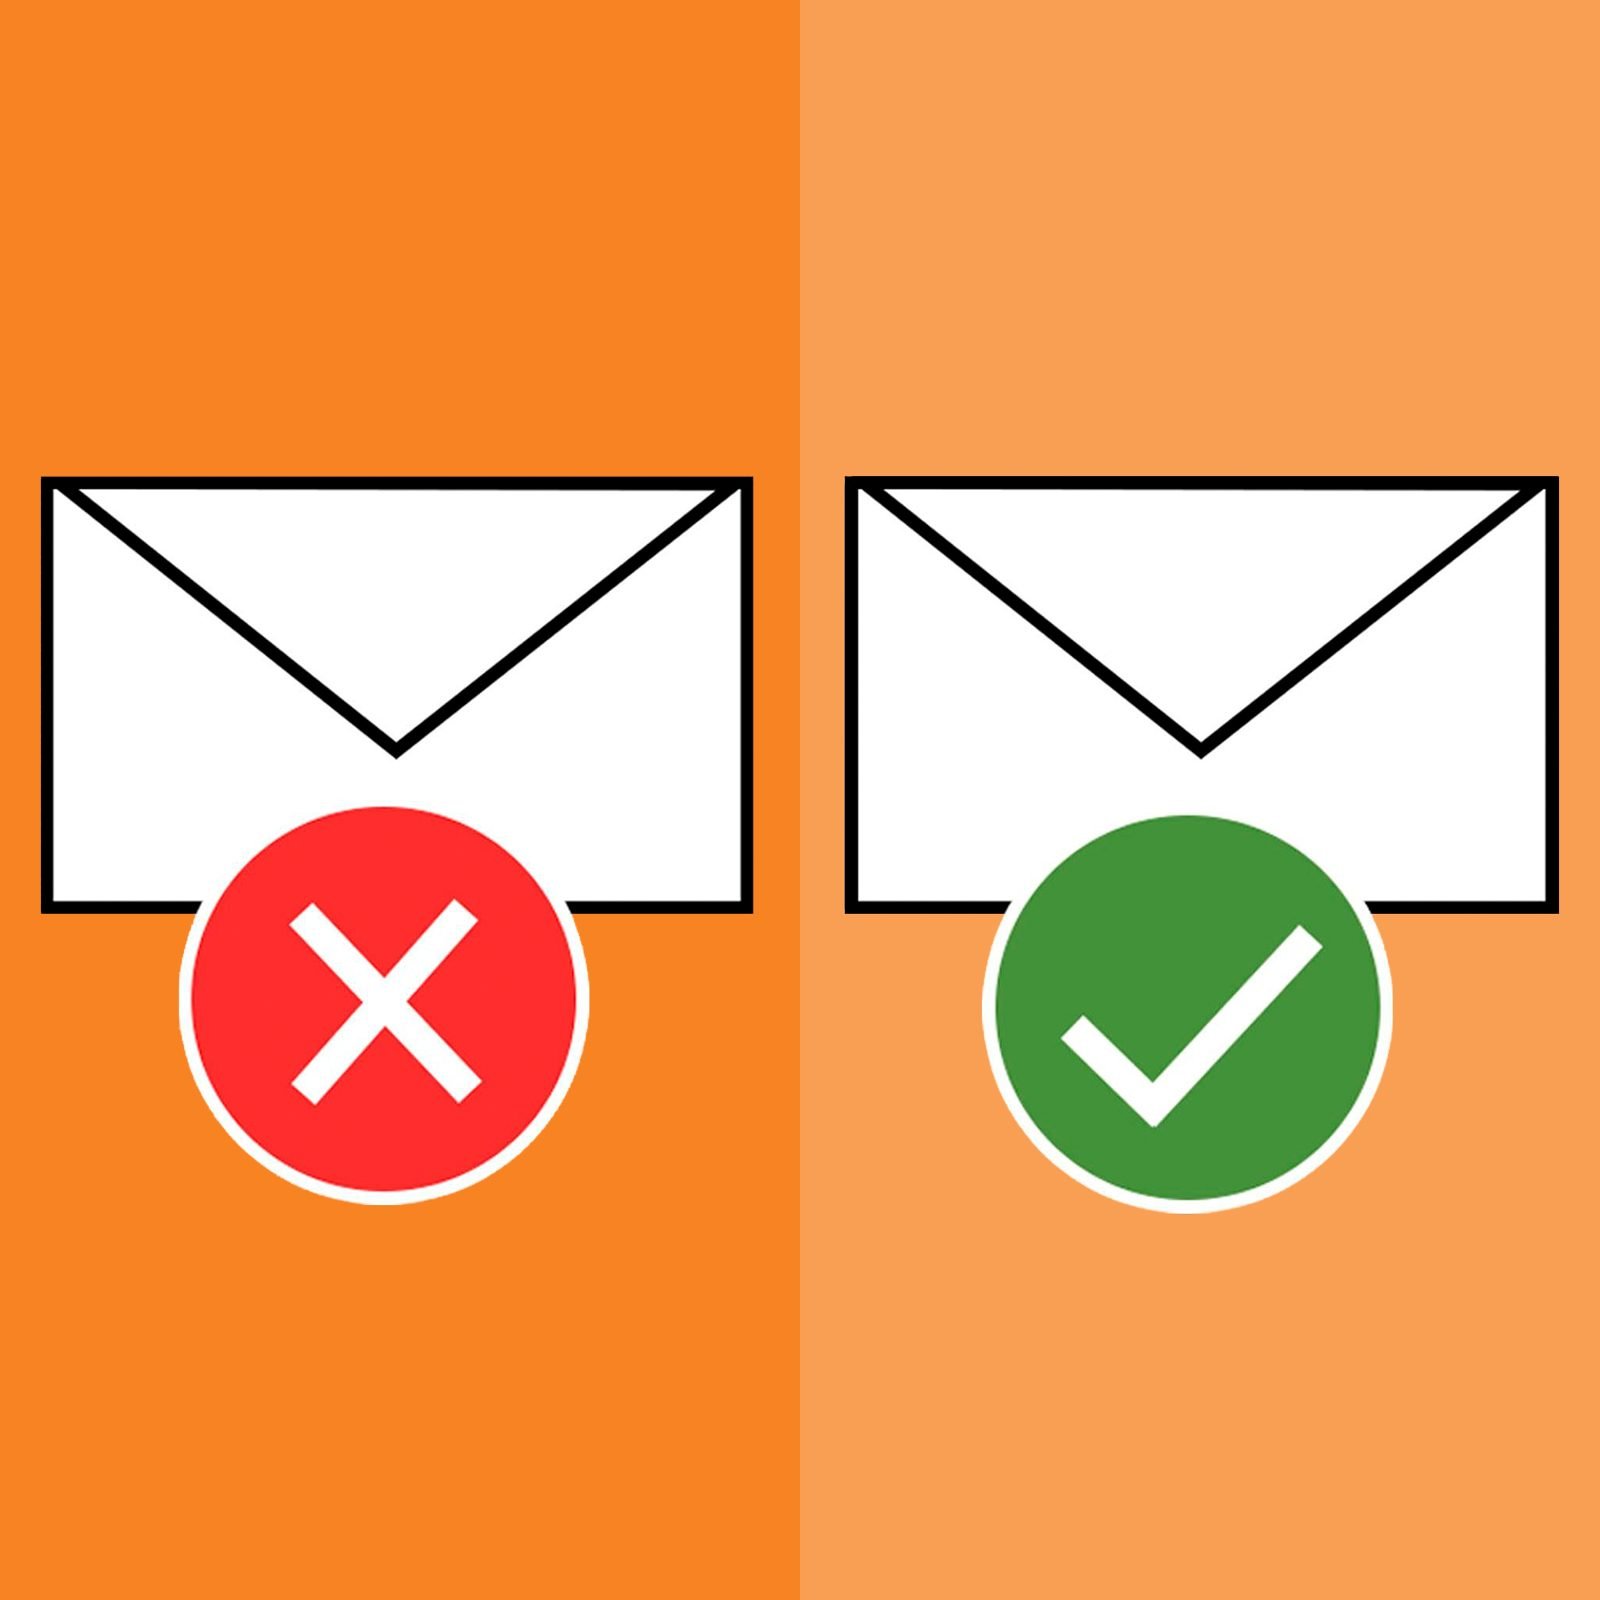 Email Etiquette: 24 Tips and Rules to Follow